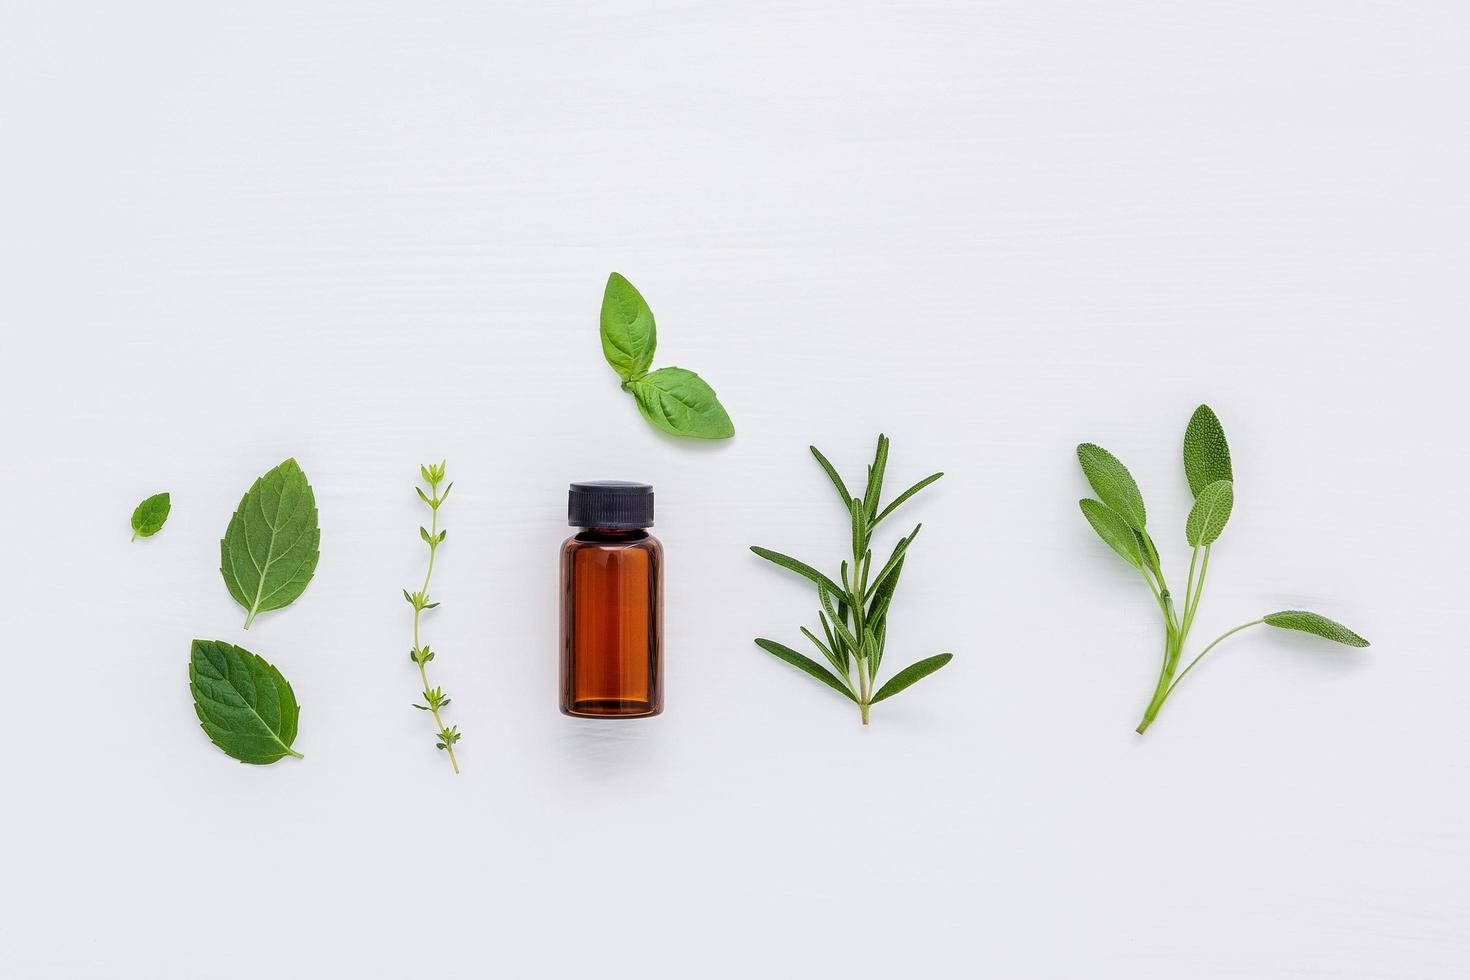 Bottle of essential oil with fresh herbs on white photo